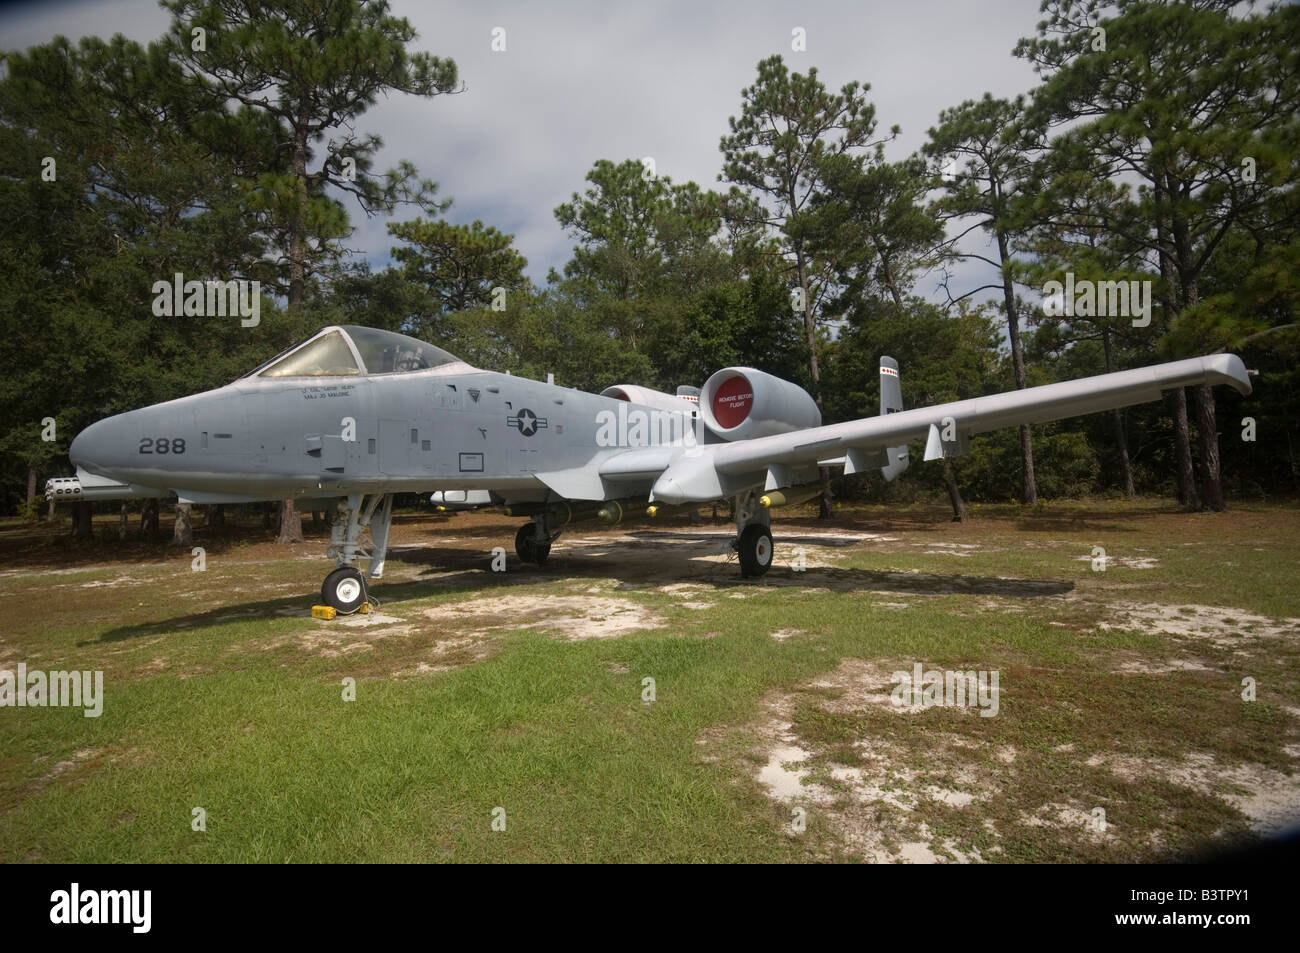 An A-10 Thunderbolt (Warthog) Ground attack jet on static display at Air Force Armament Museum, Eglin AFB Florida Stock Photo